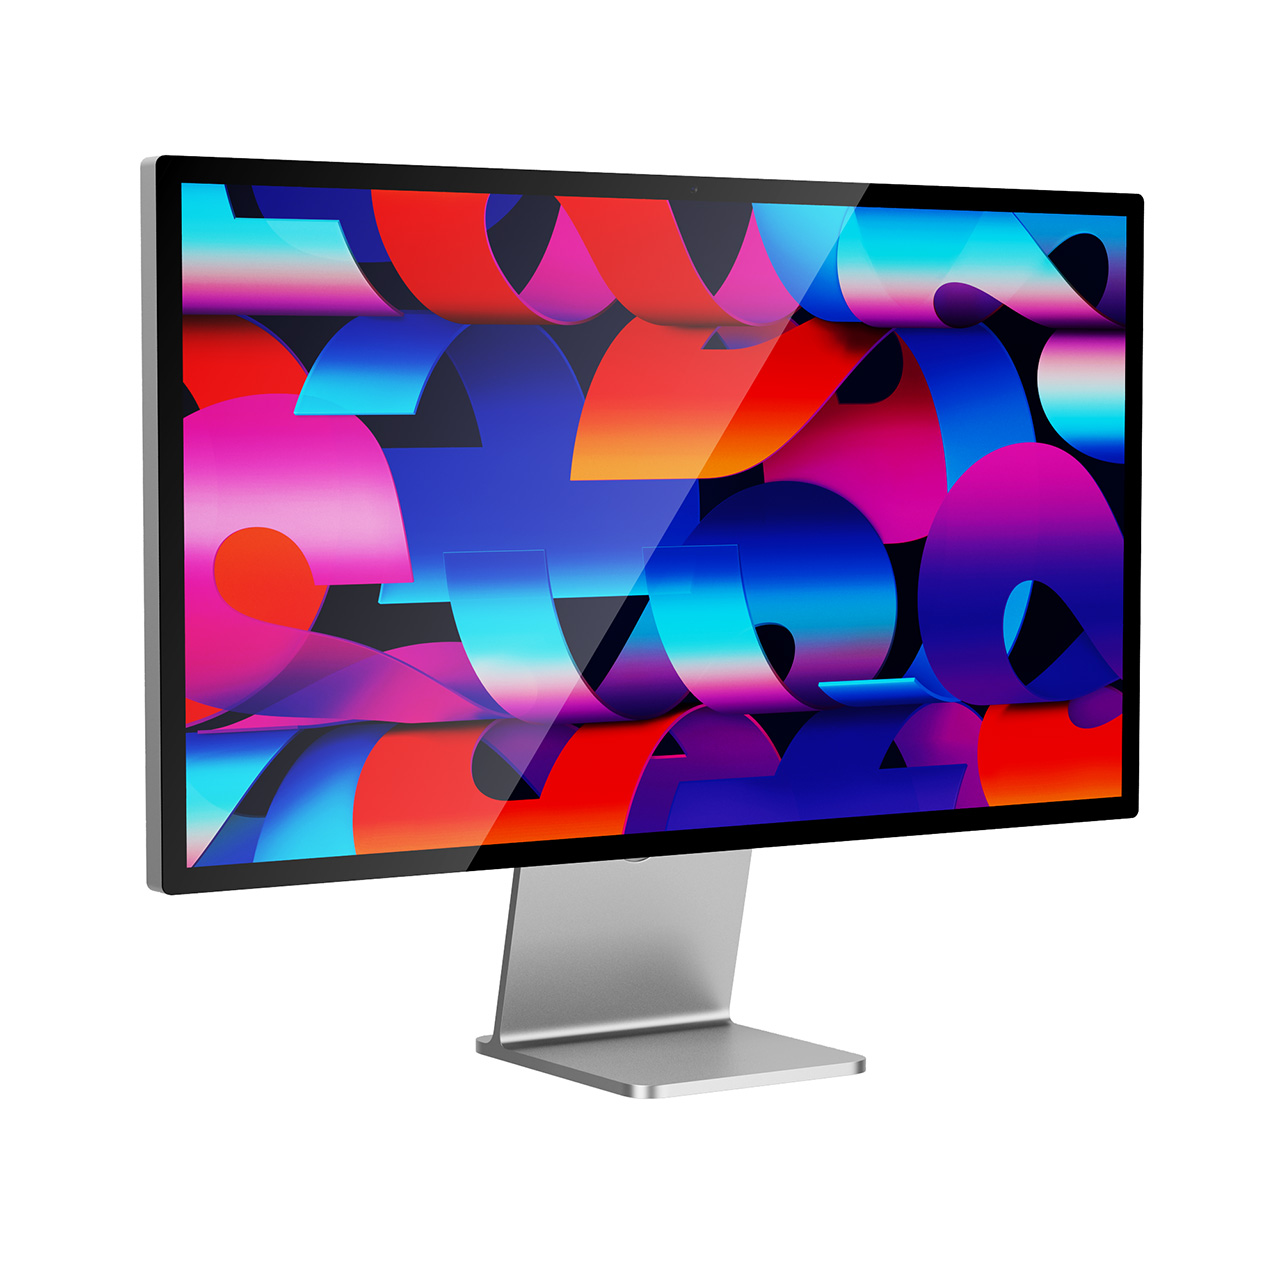 Studio Display 27-inch Monitor 2022 by Apple